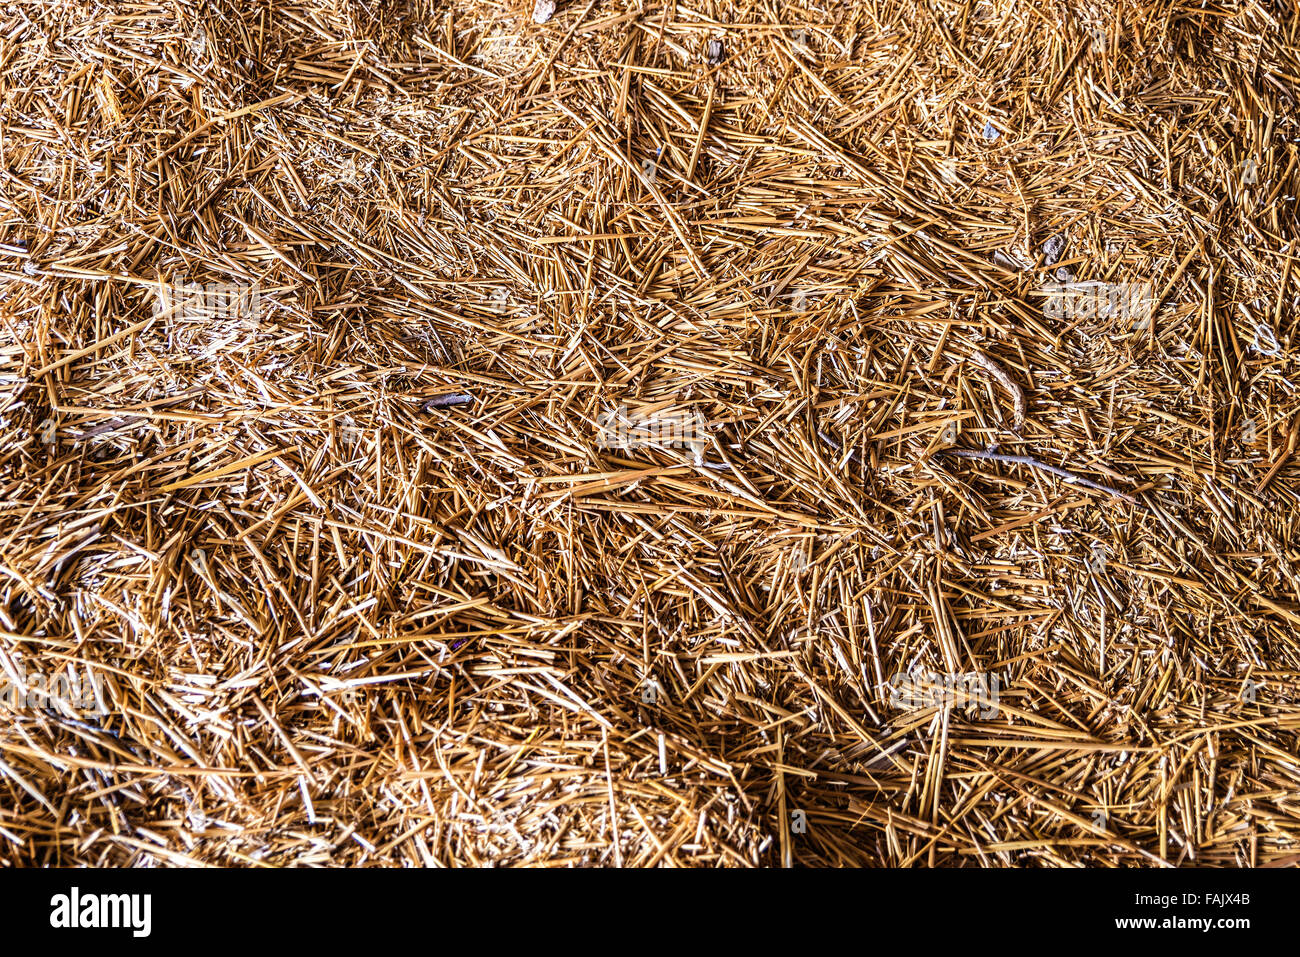 Bed made of straw in a barn Stock Photo